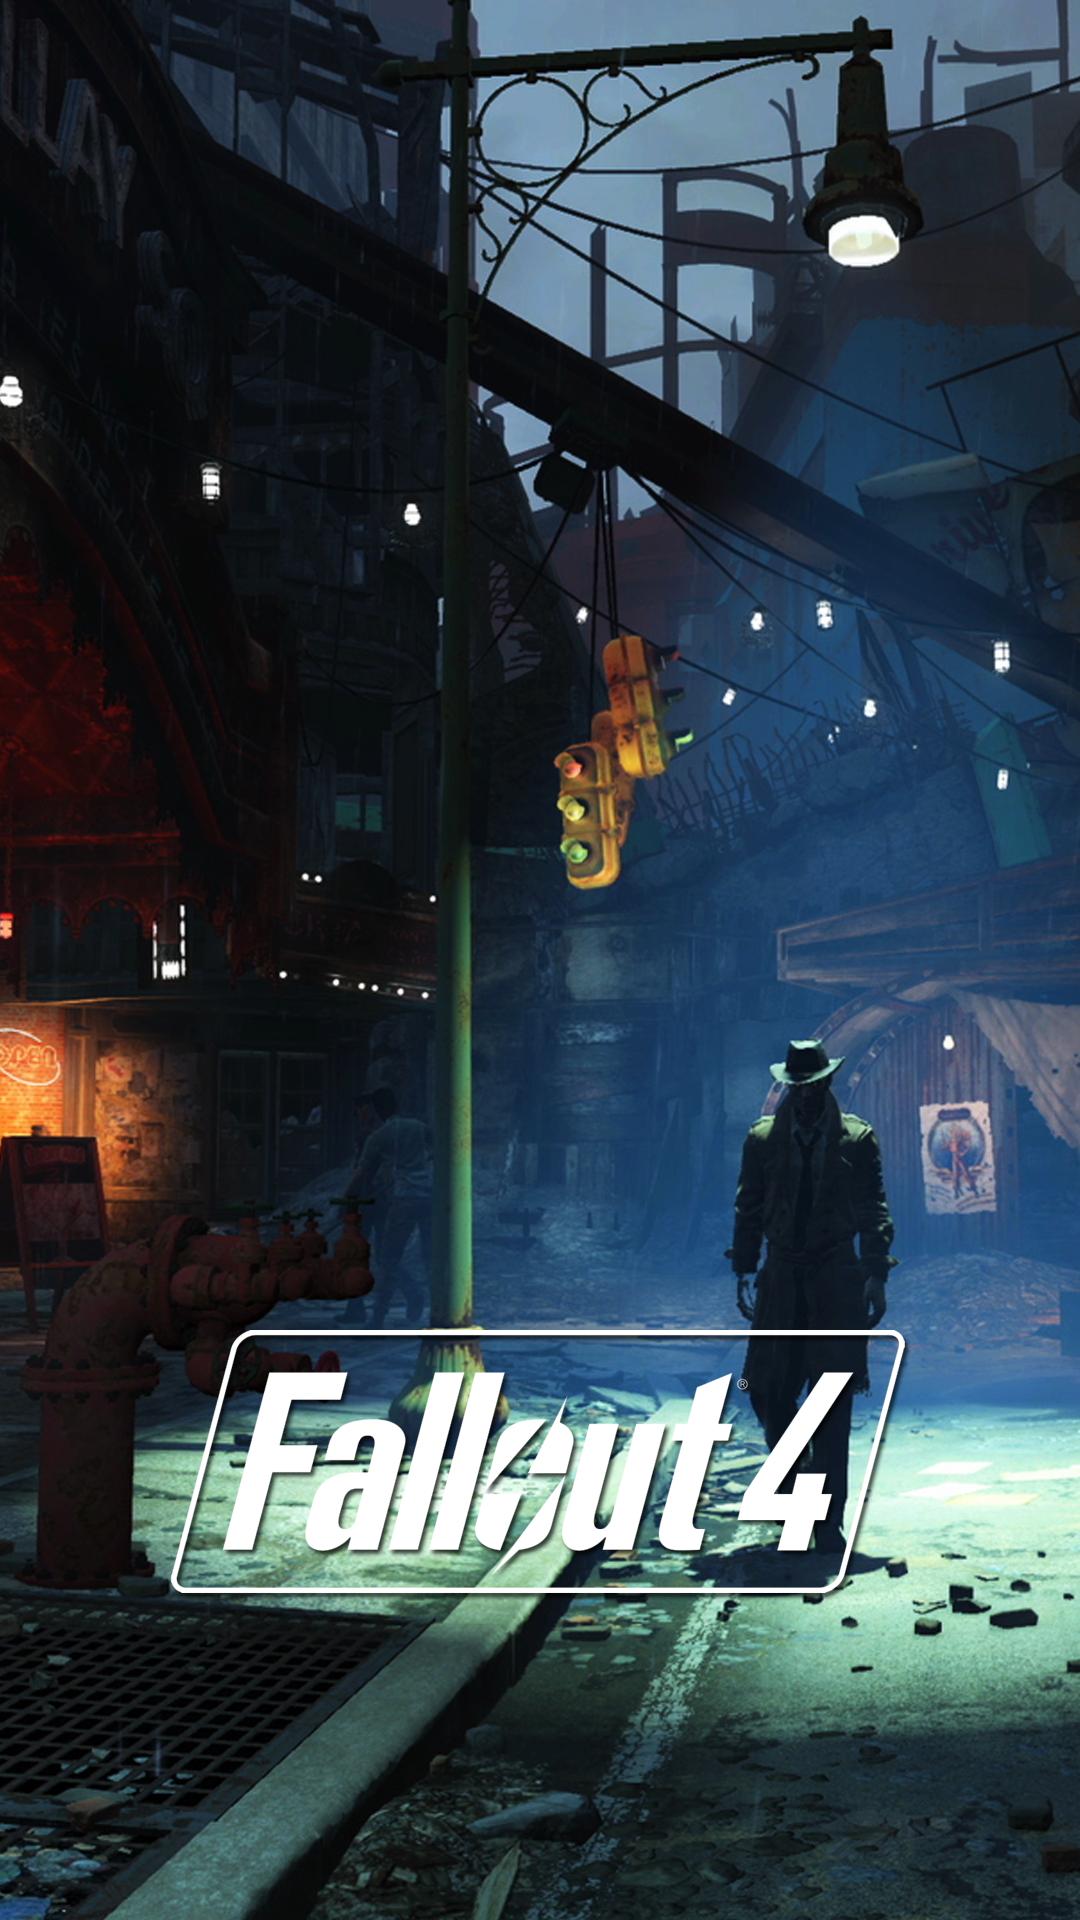 18 Fallout 4 Wallpapers for Mobile! - Fallout 4 / FO4 mods